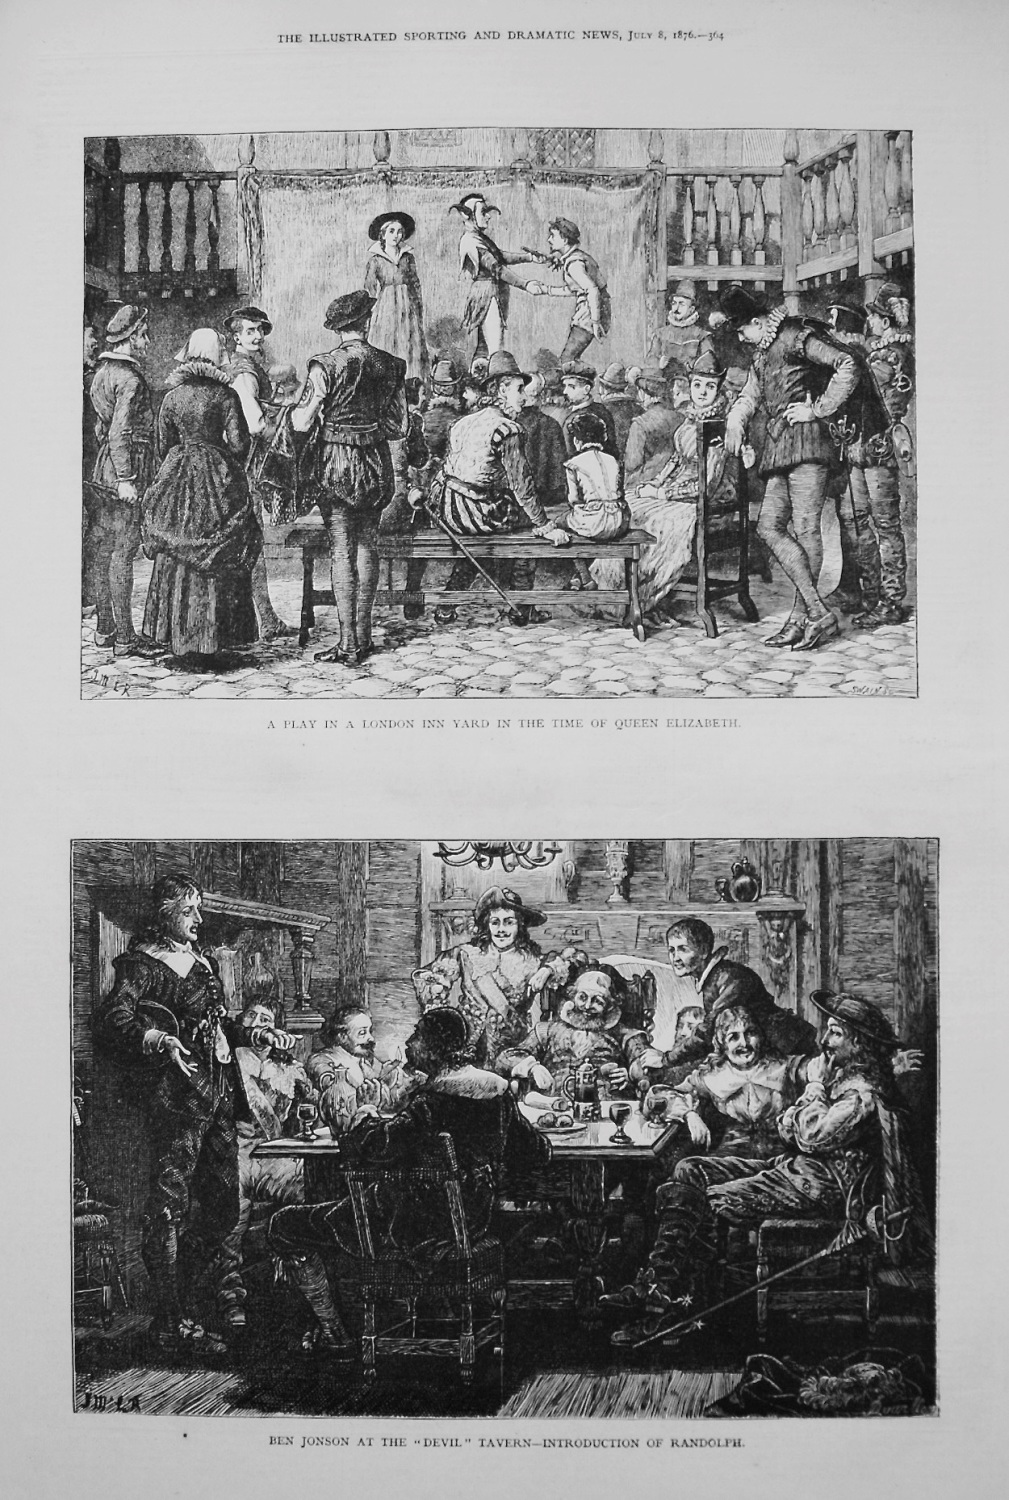 A Play in a London Inn Yard in the Time of Queen Elizabeth. 1876